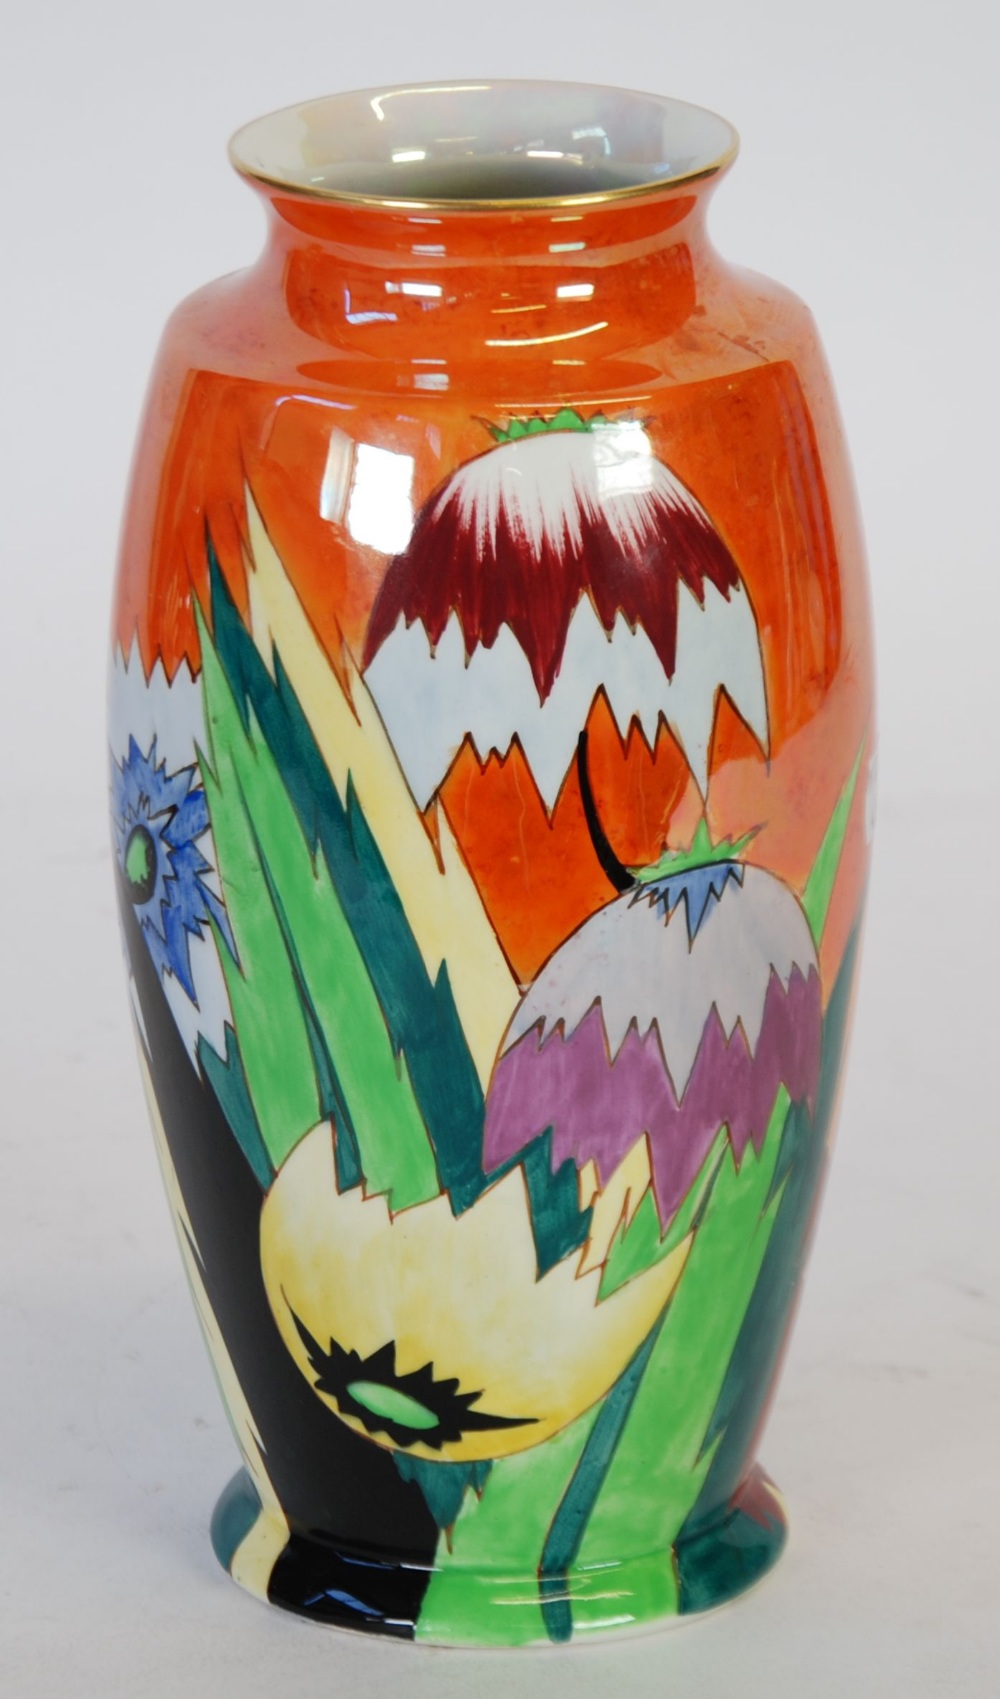 ART DECO CARLTON WARE ANEMONE PATTERN 'HANDCRAFT' POTTERY VASE, of footed oviform with short waisted